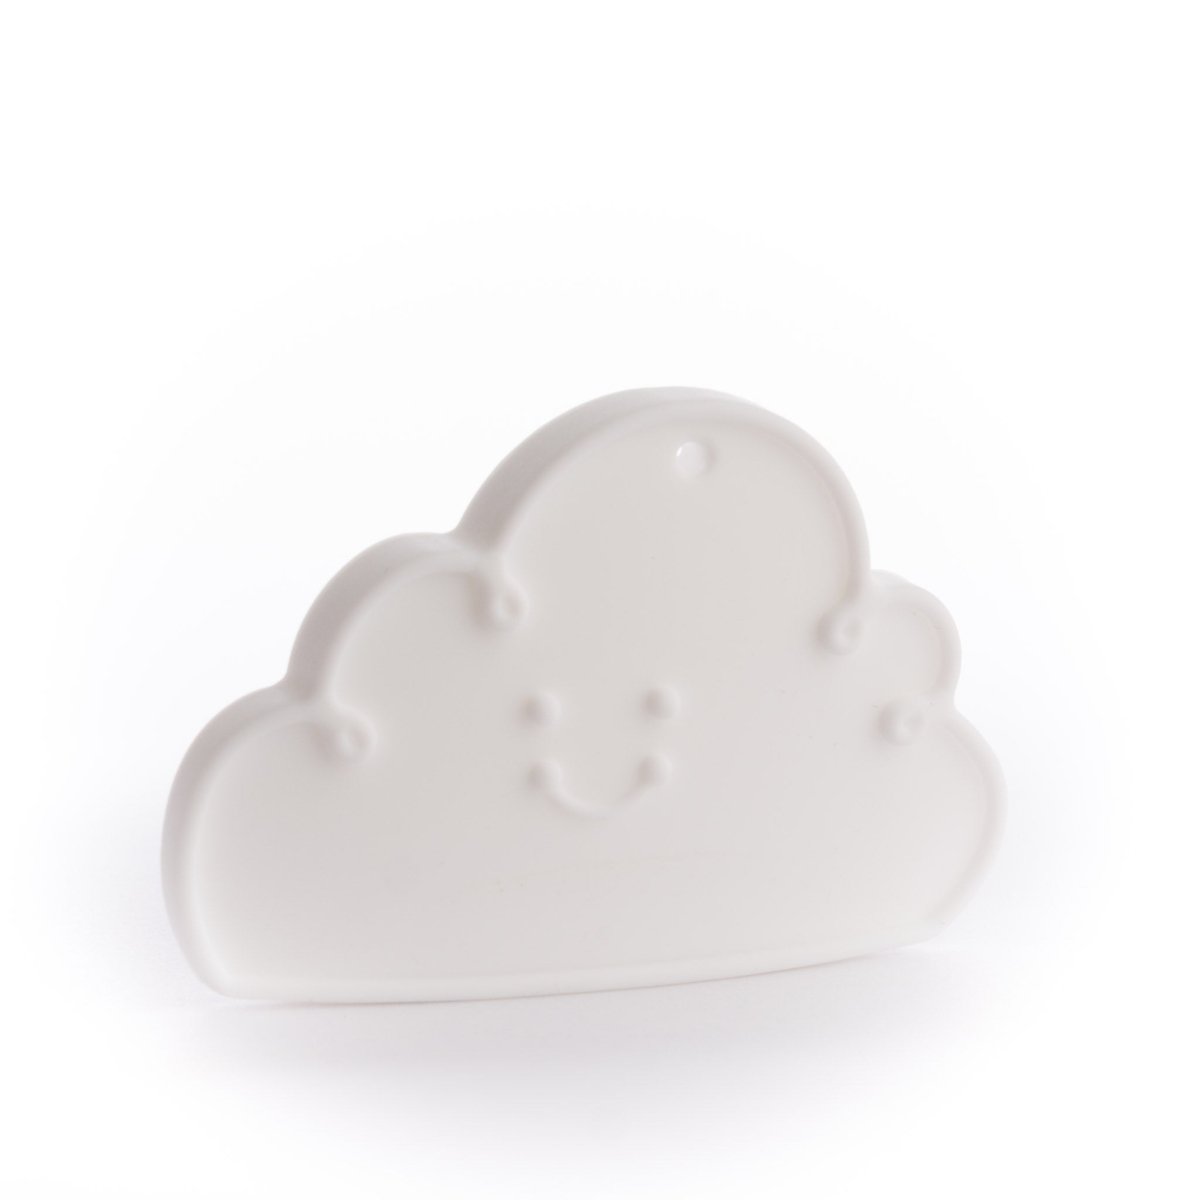 Silicone Teethers and Pendants Clouds White from Cara & Co Craft Supply